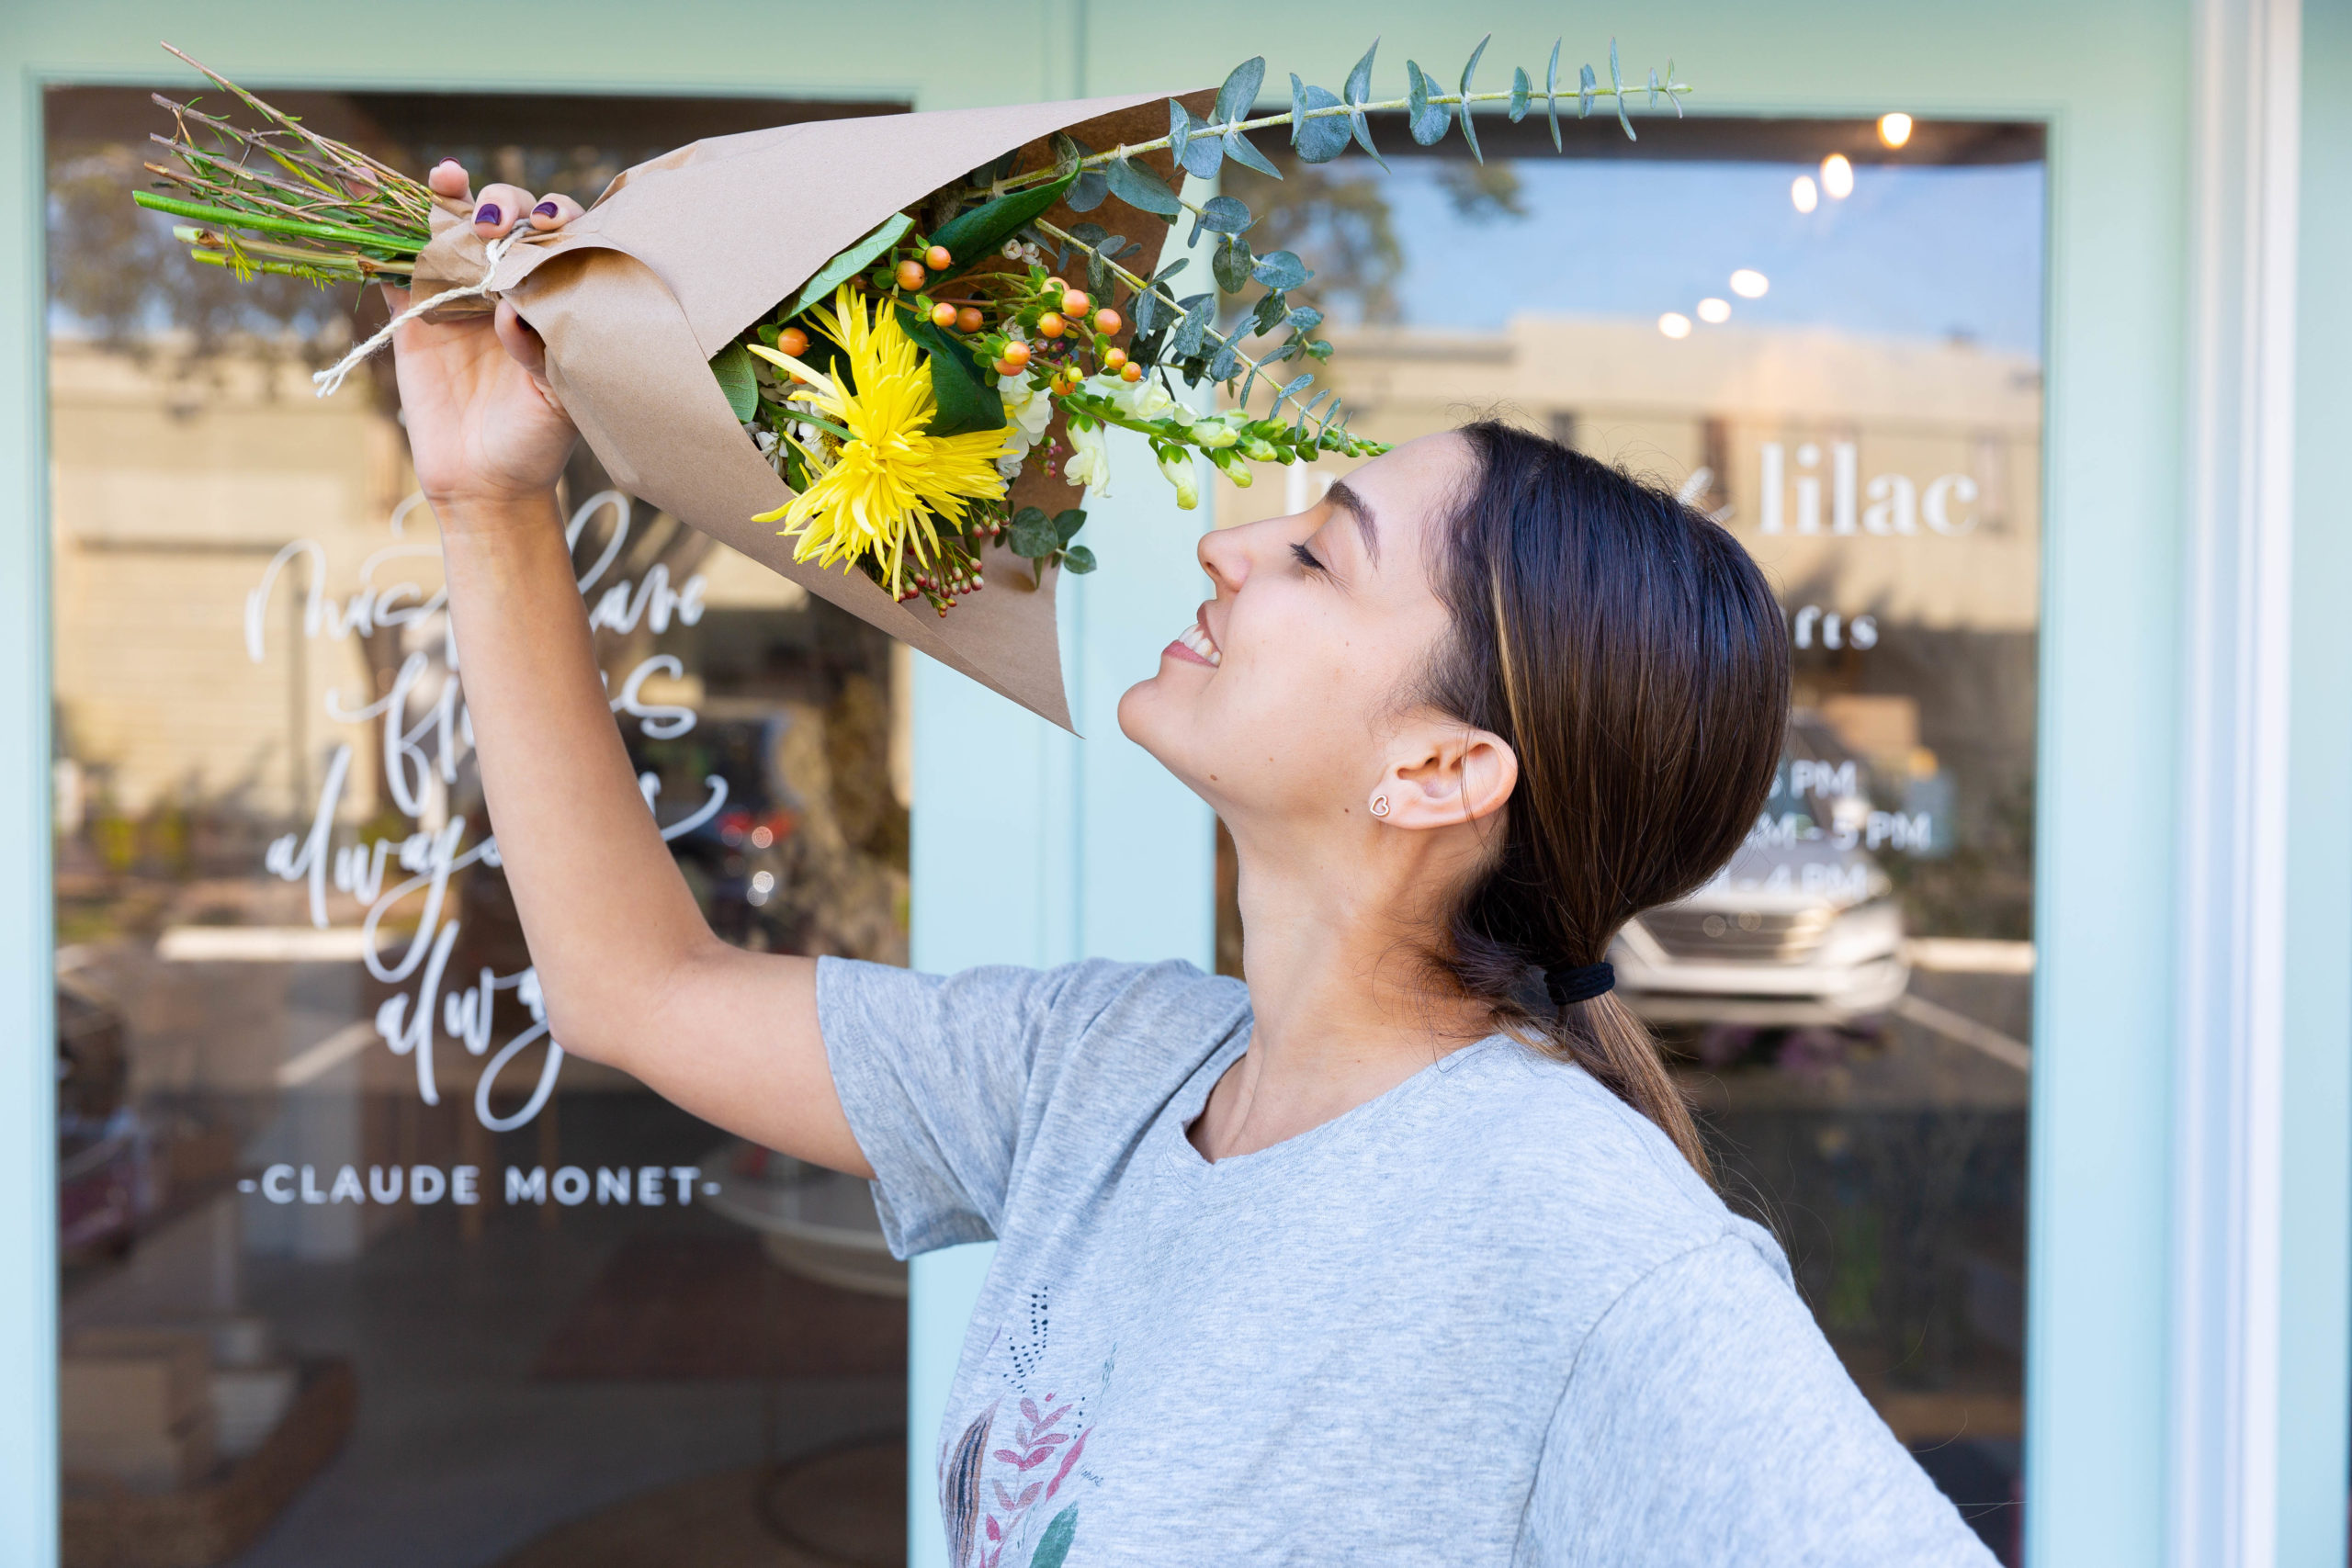 Smiling woman stands outside Miami flower shop House of Lilac, holding up a wrapped bouquet of flowers.